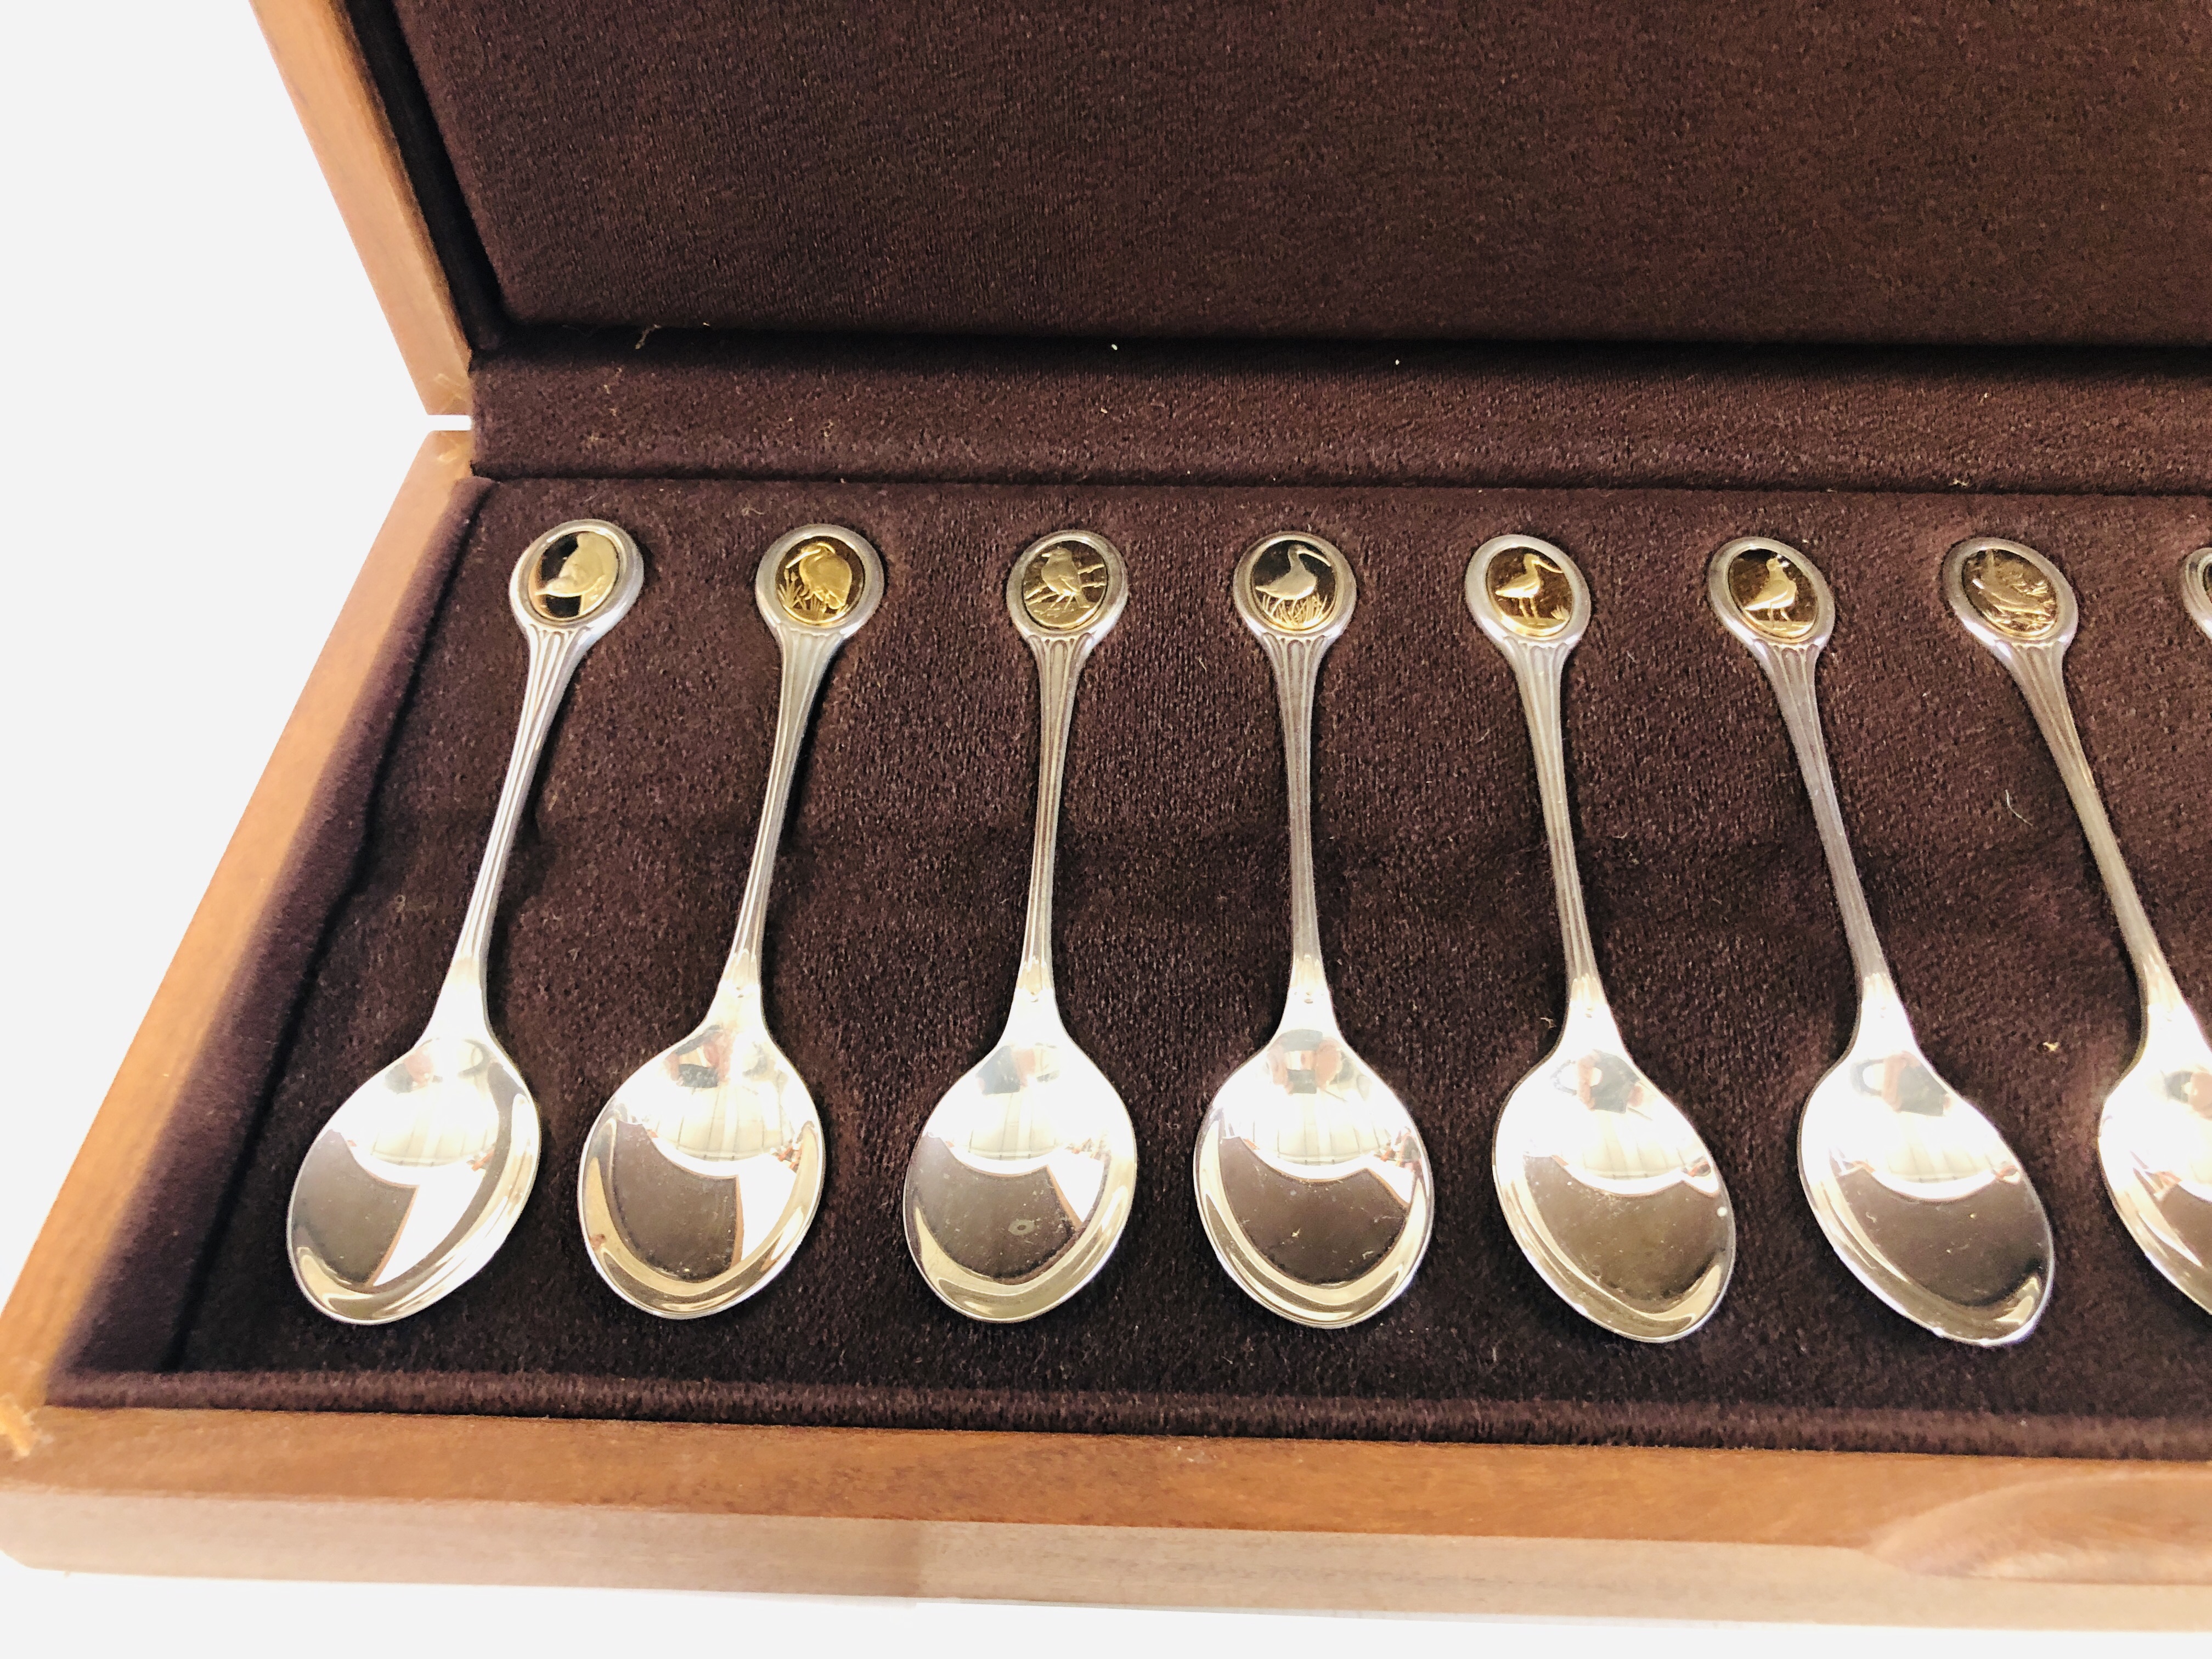 AN RSPB SILVER SPOON COLLECTION, J PINCHES LON 1975, 12 SPOONS. - Image 2 of 11